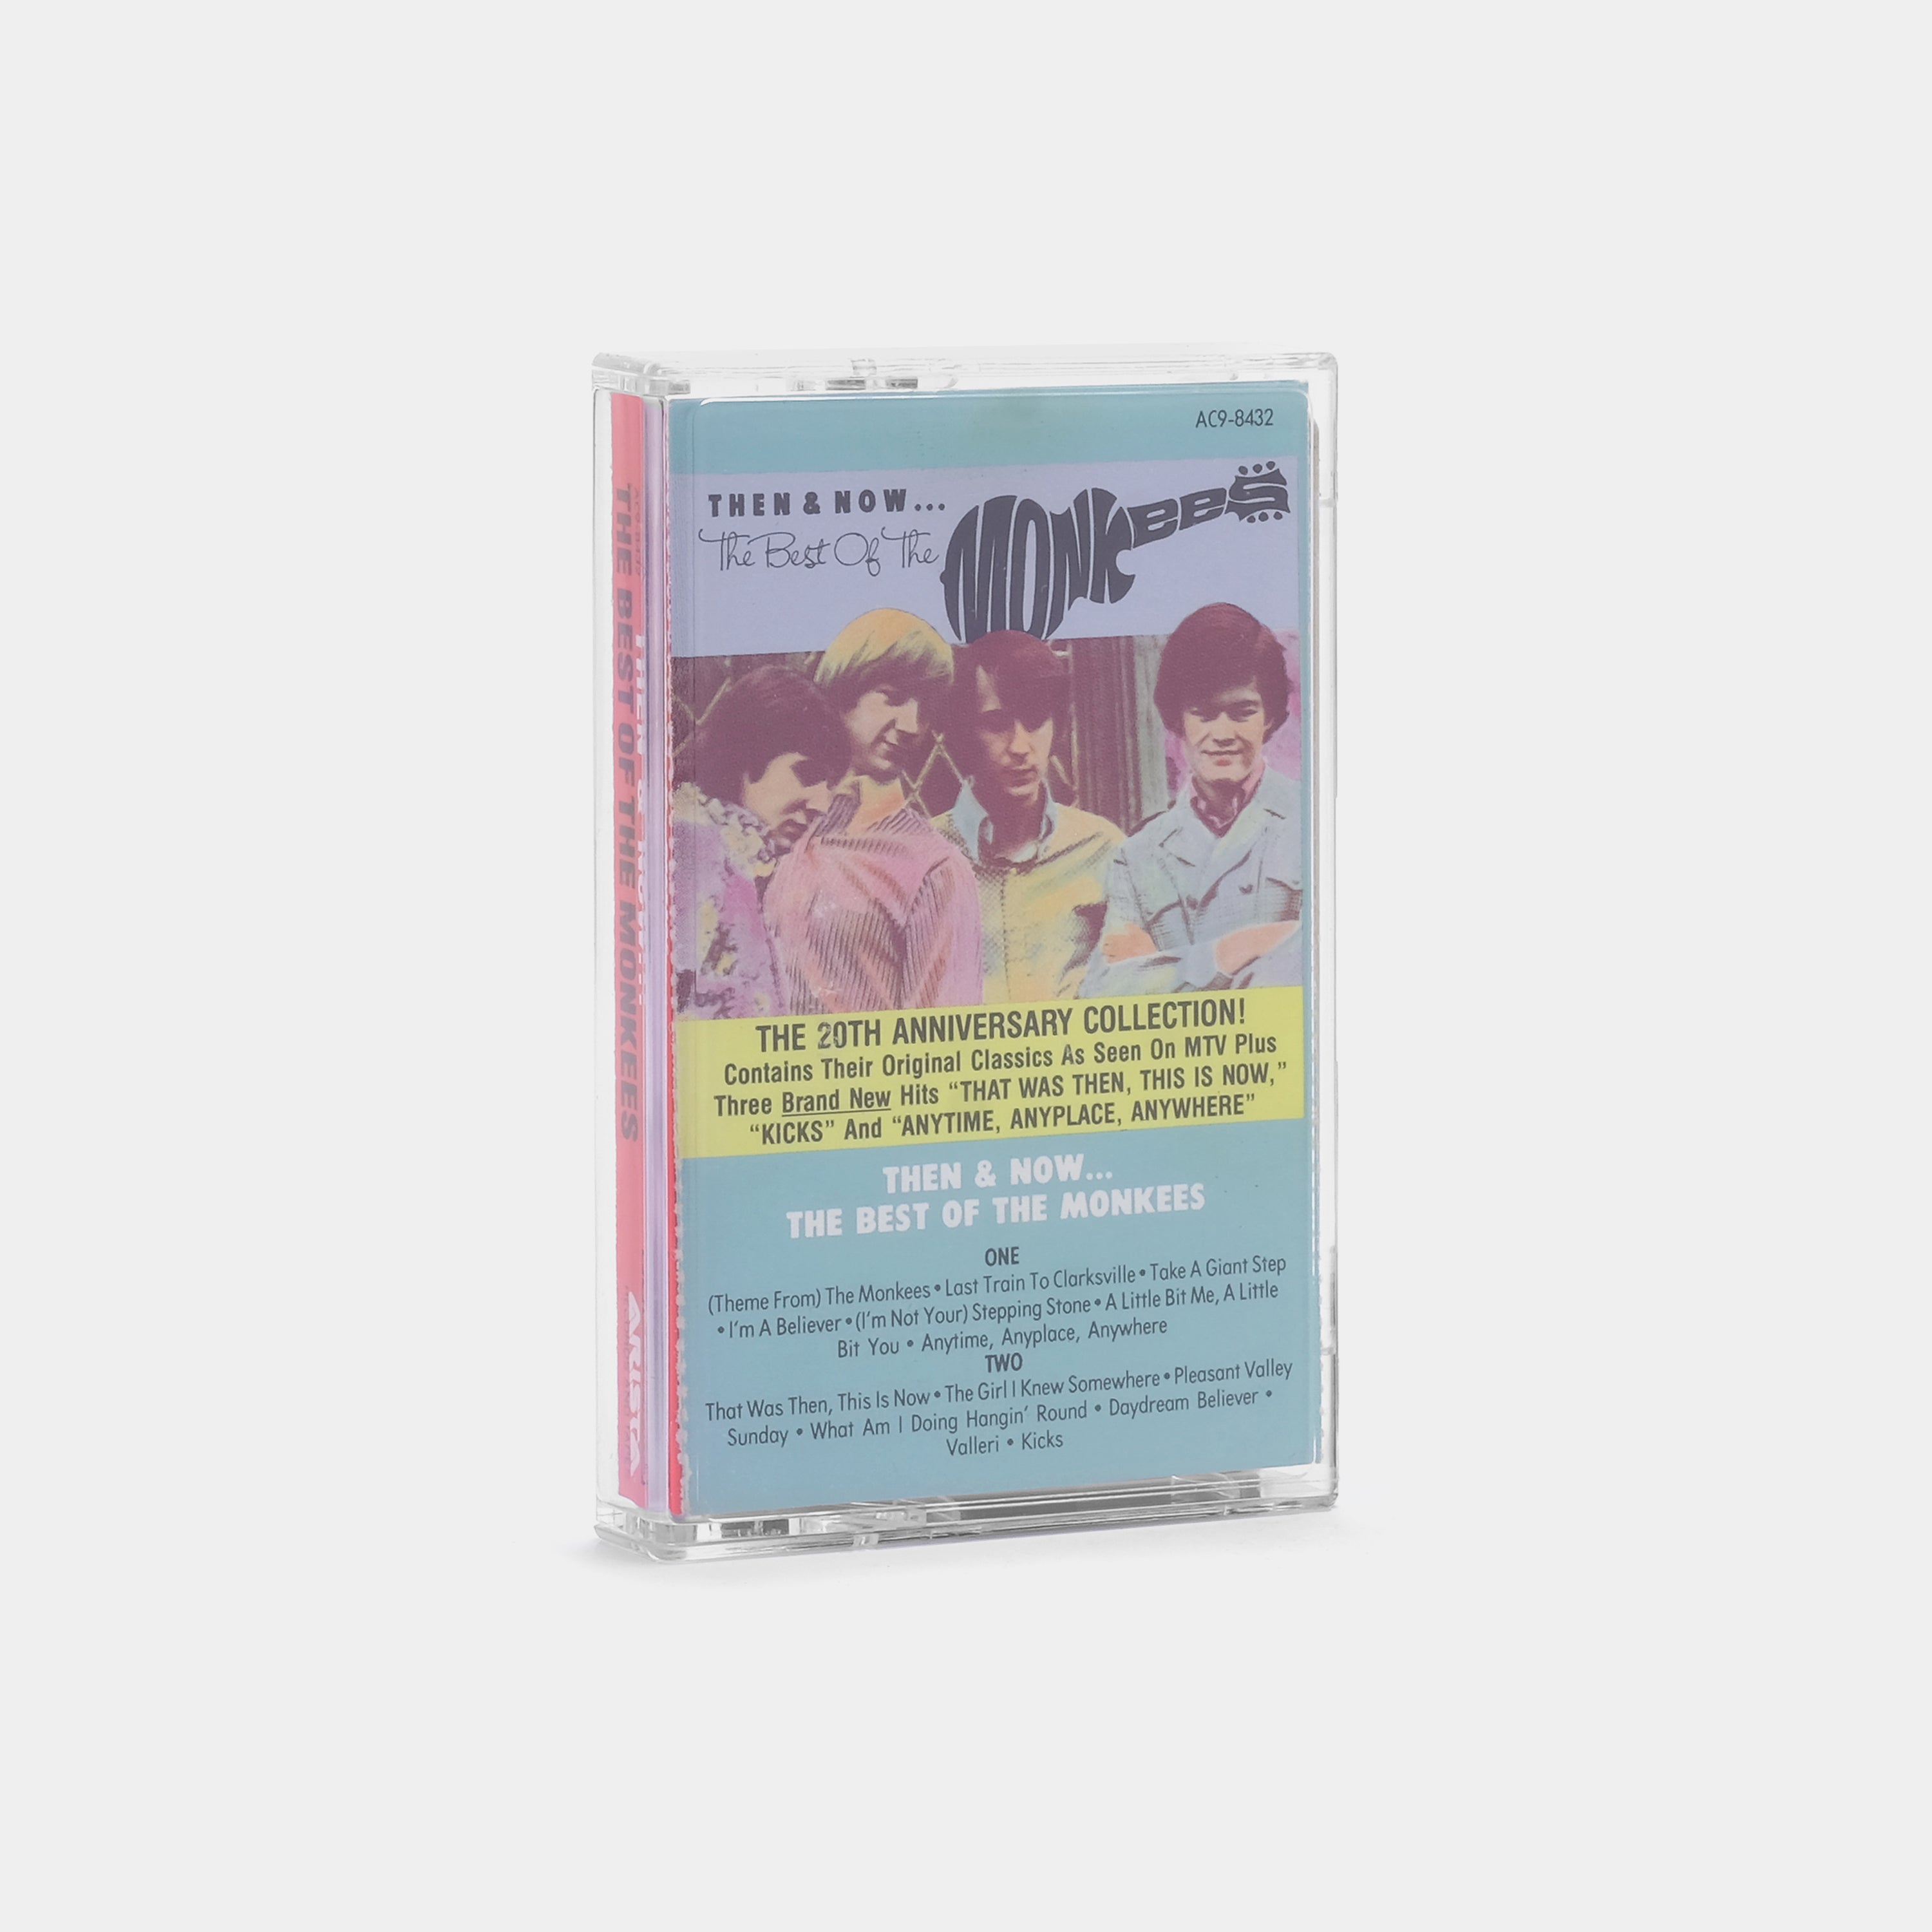 The Monkees - Then & Now... The Best Of The Monkees Cassette Tape